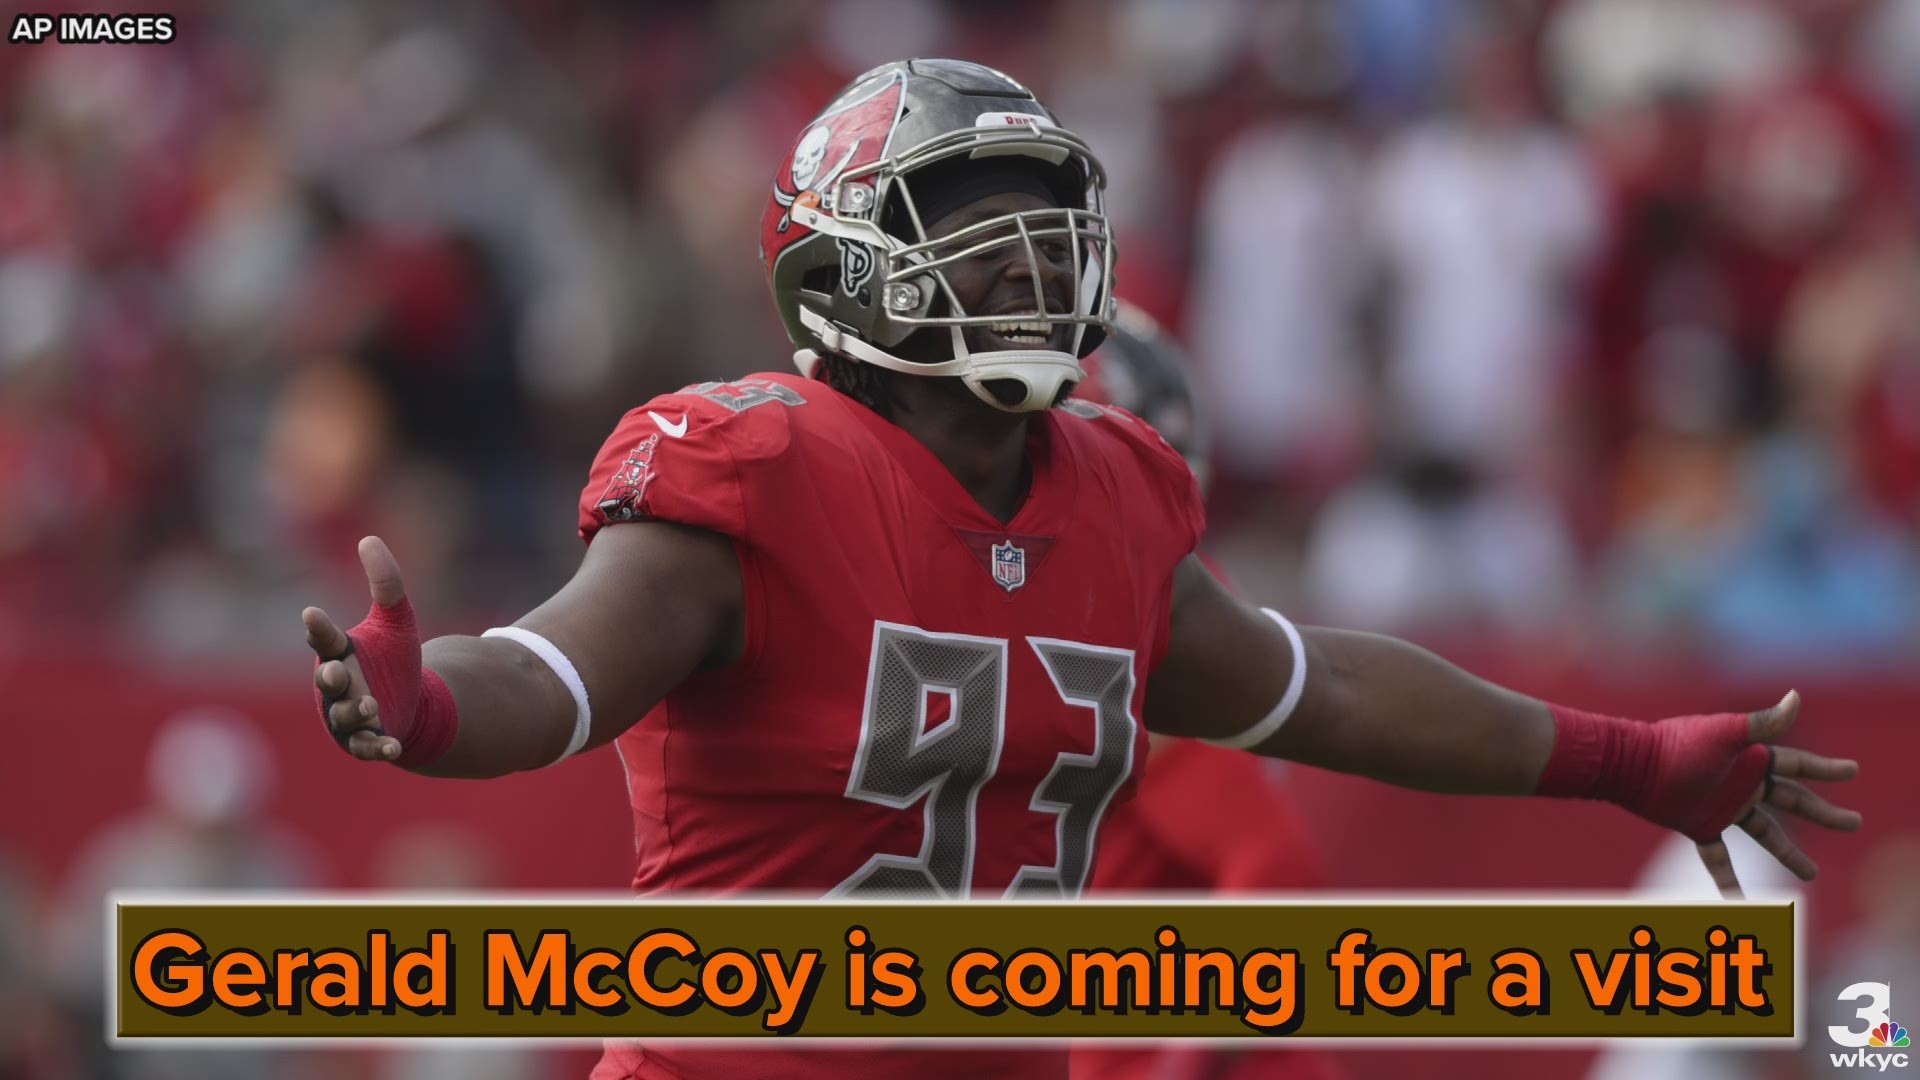 Six-time Pro Bowl defensive tackle Gerald McCoy is set to make a free-agent visit to the Cleveland Browns Friday.